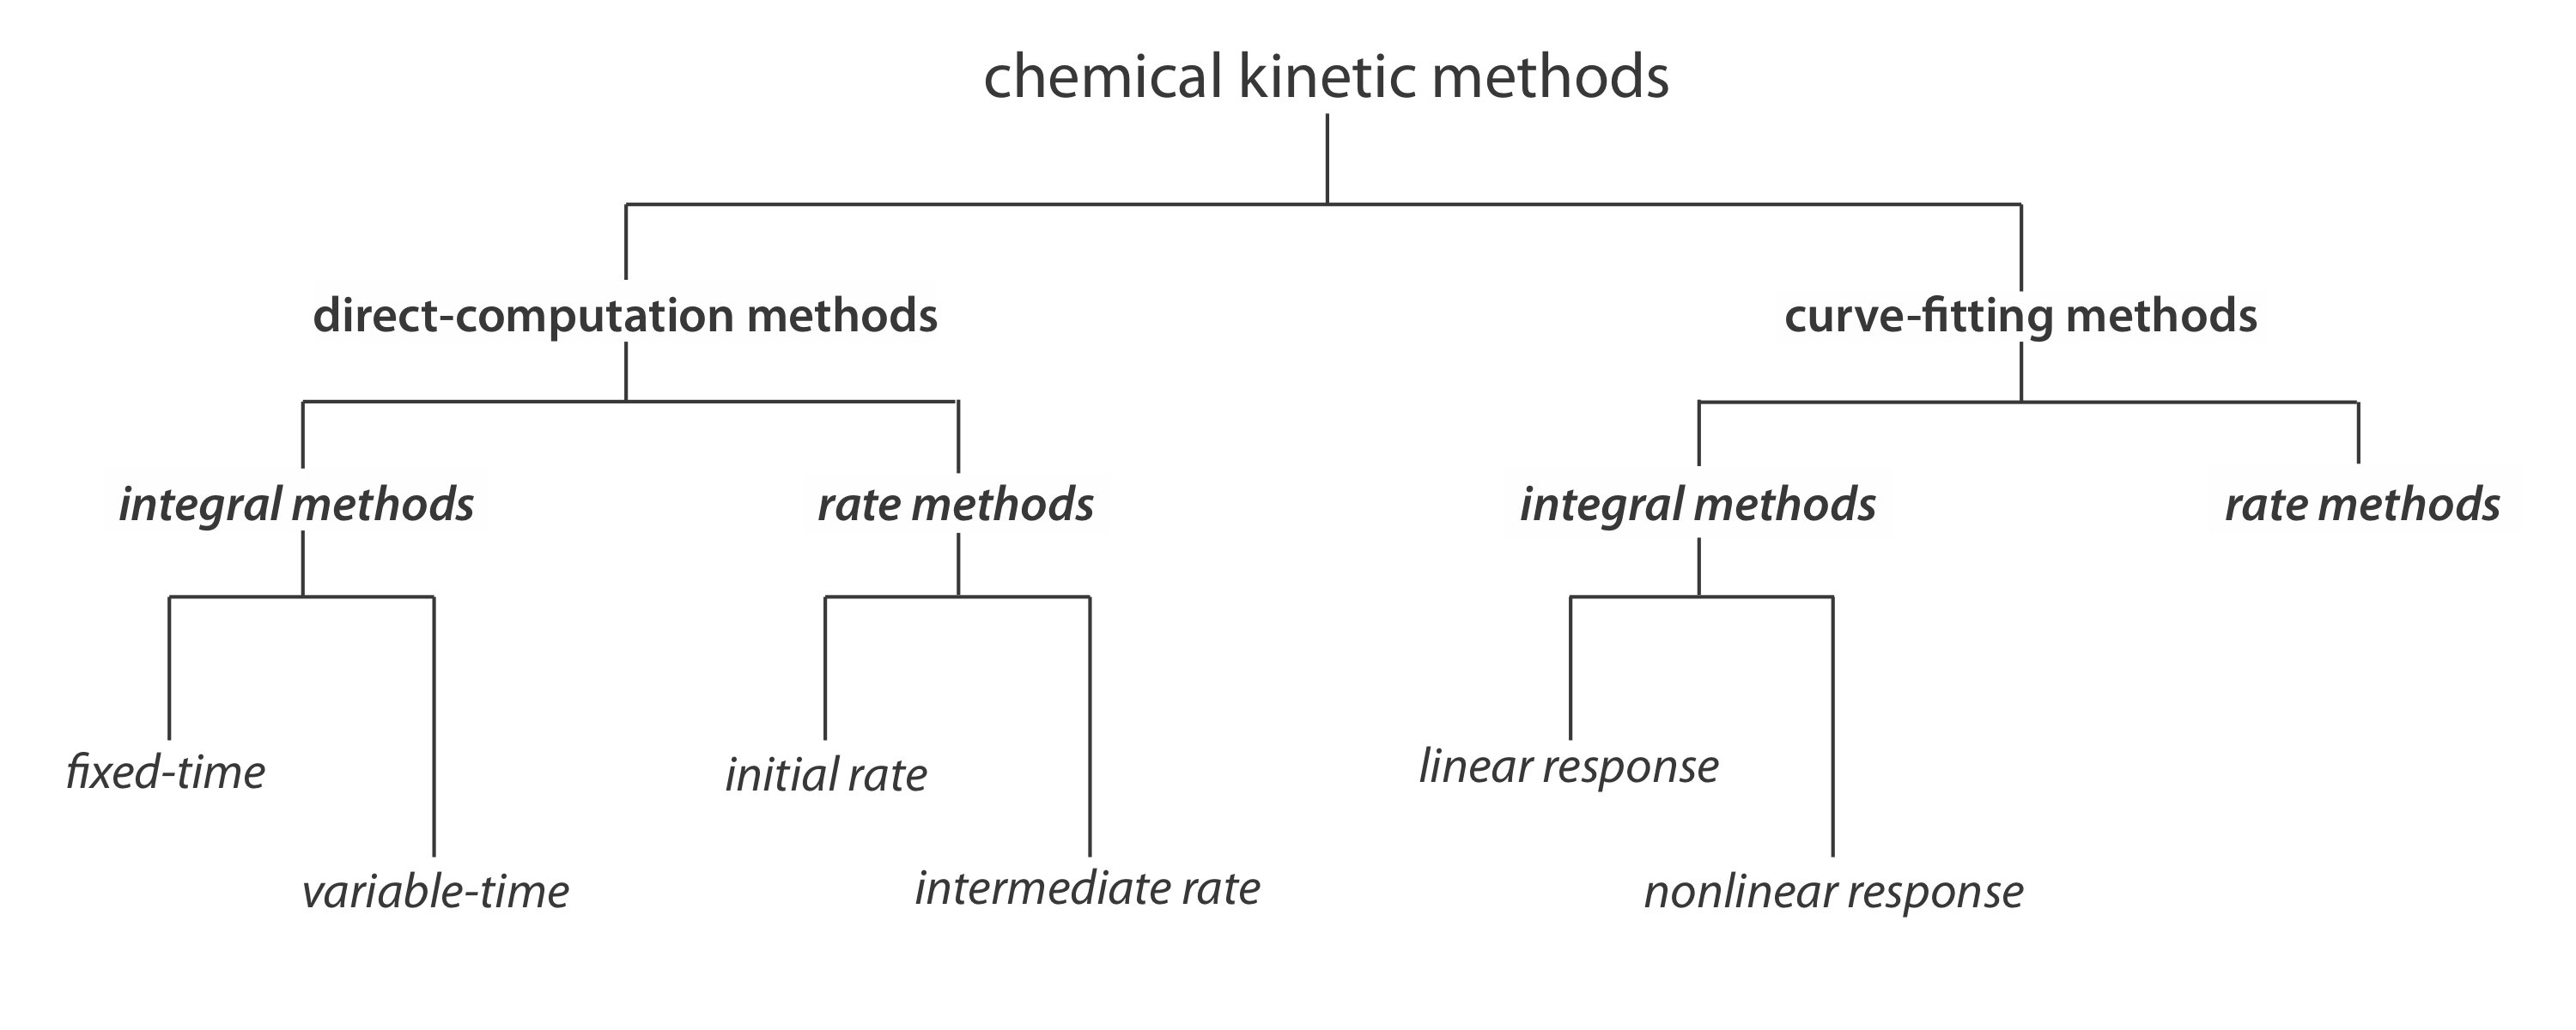 Chemical kinetic methods are broken down into two initial branches: direct computation and curve fitting. Direct computation is broken into integral methods and rate methods. Integral includes fixed time and variable time. Rate methods include initial rate and immediate rate. Curve fitting is also broken into rate methods (which has no subbranches) and integral methods which include linear and nonlinear responses.